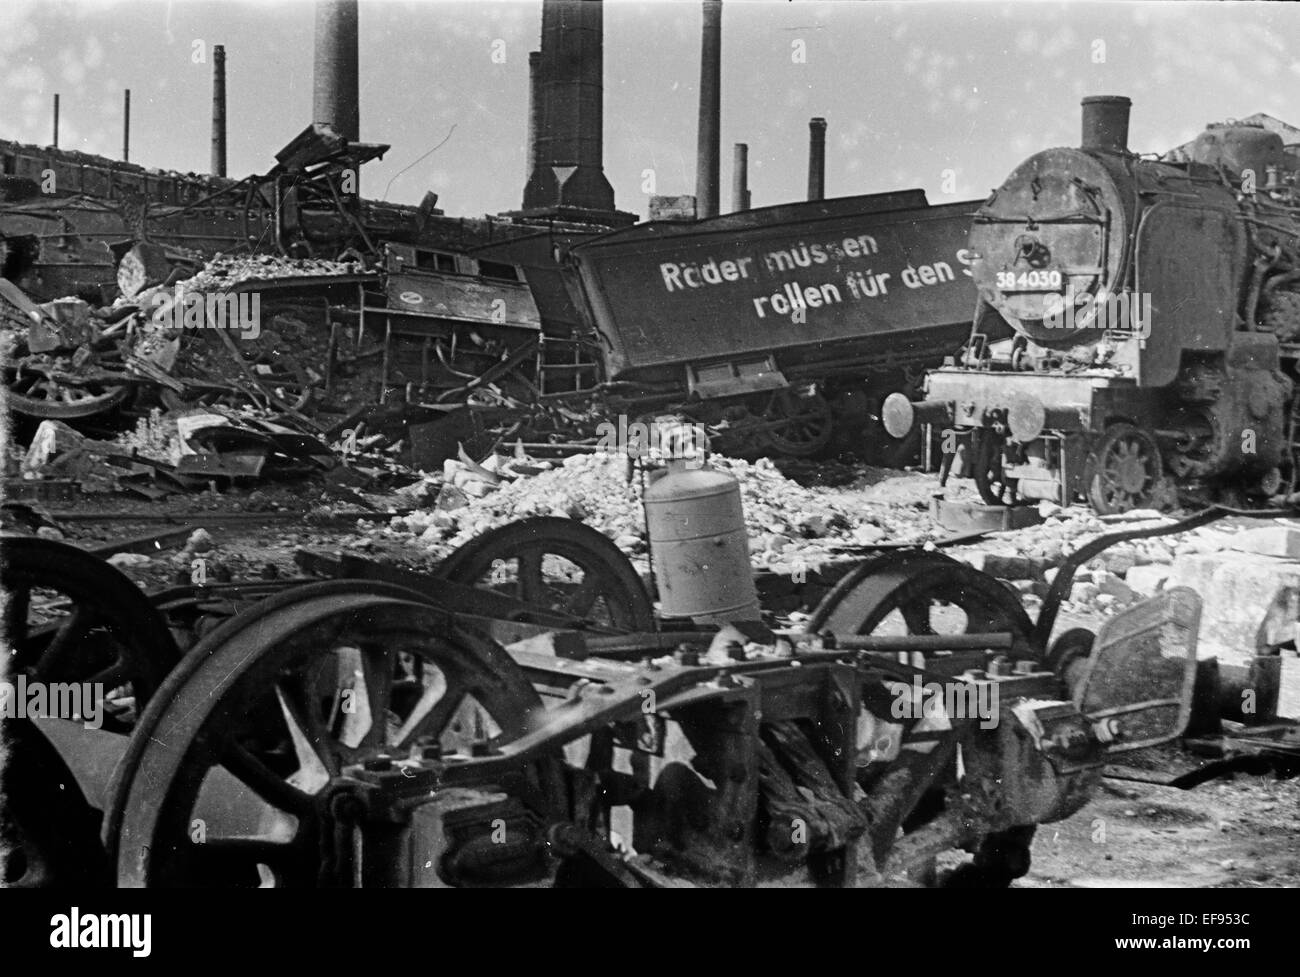 The photo by famous photographer Richard Peter sen. shows the terrain of the Deutsche Reichsbahn in Dresden with destroyed locomotives and track installations. Amid the ruins is still the Nazi slogan from war: 'Wheels must roll for victory'. The photo was taken after 17 September 1945. Especially the Allied air raids between 13 and 14 February 1945 led to extensive destructions of the city.  Photo: Deutsche Fotothek / Richard Peter sen. - NO WIRE SERVICE Stock Photo